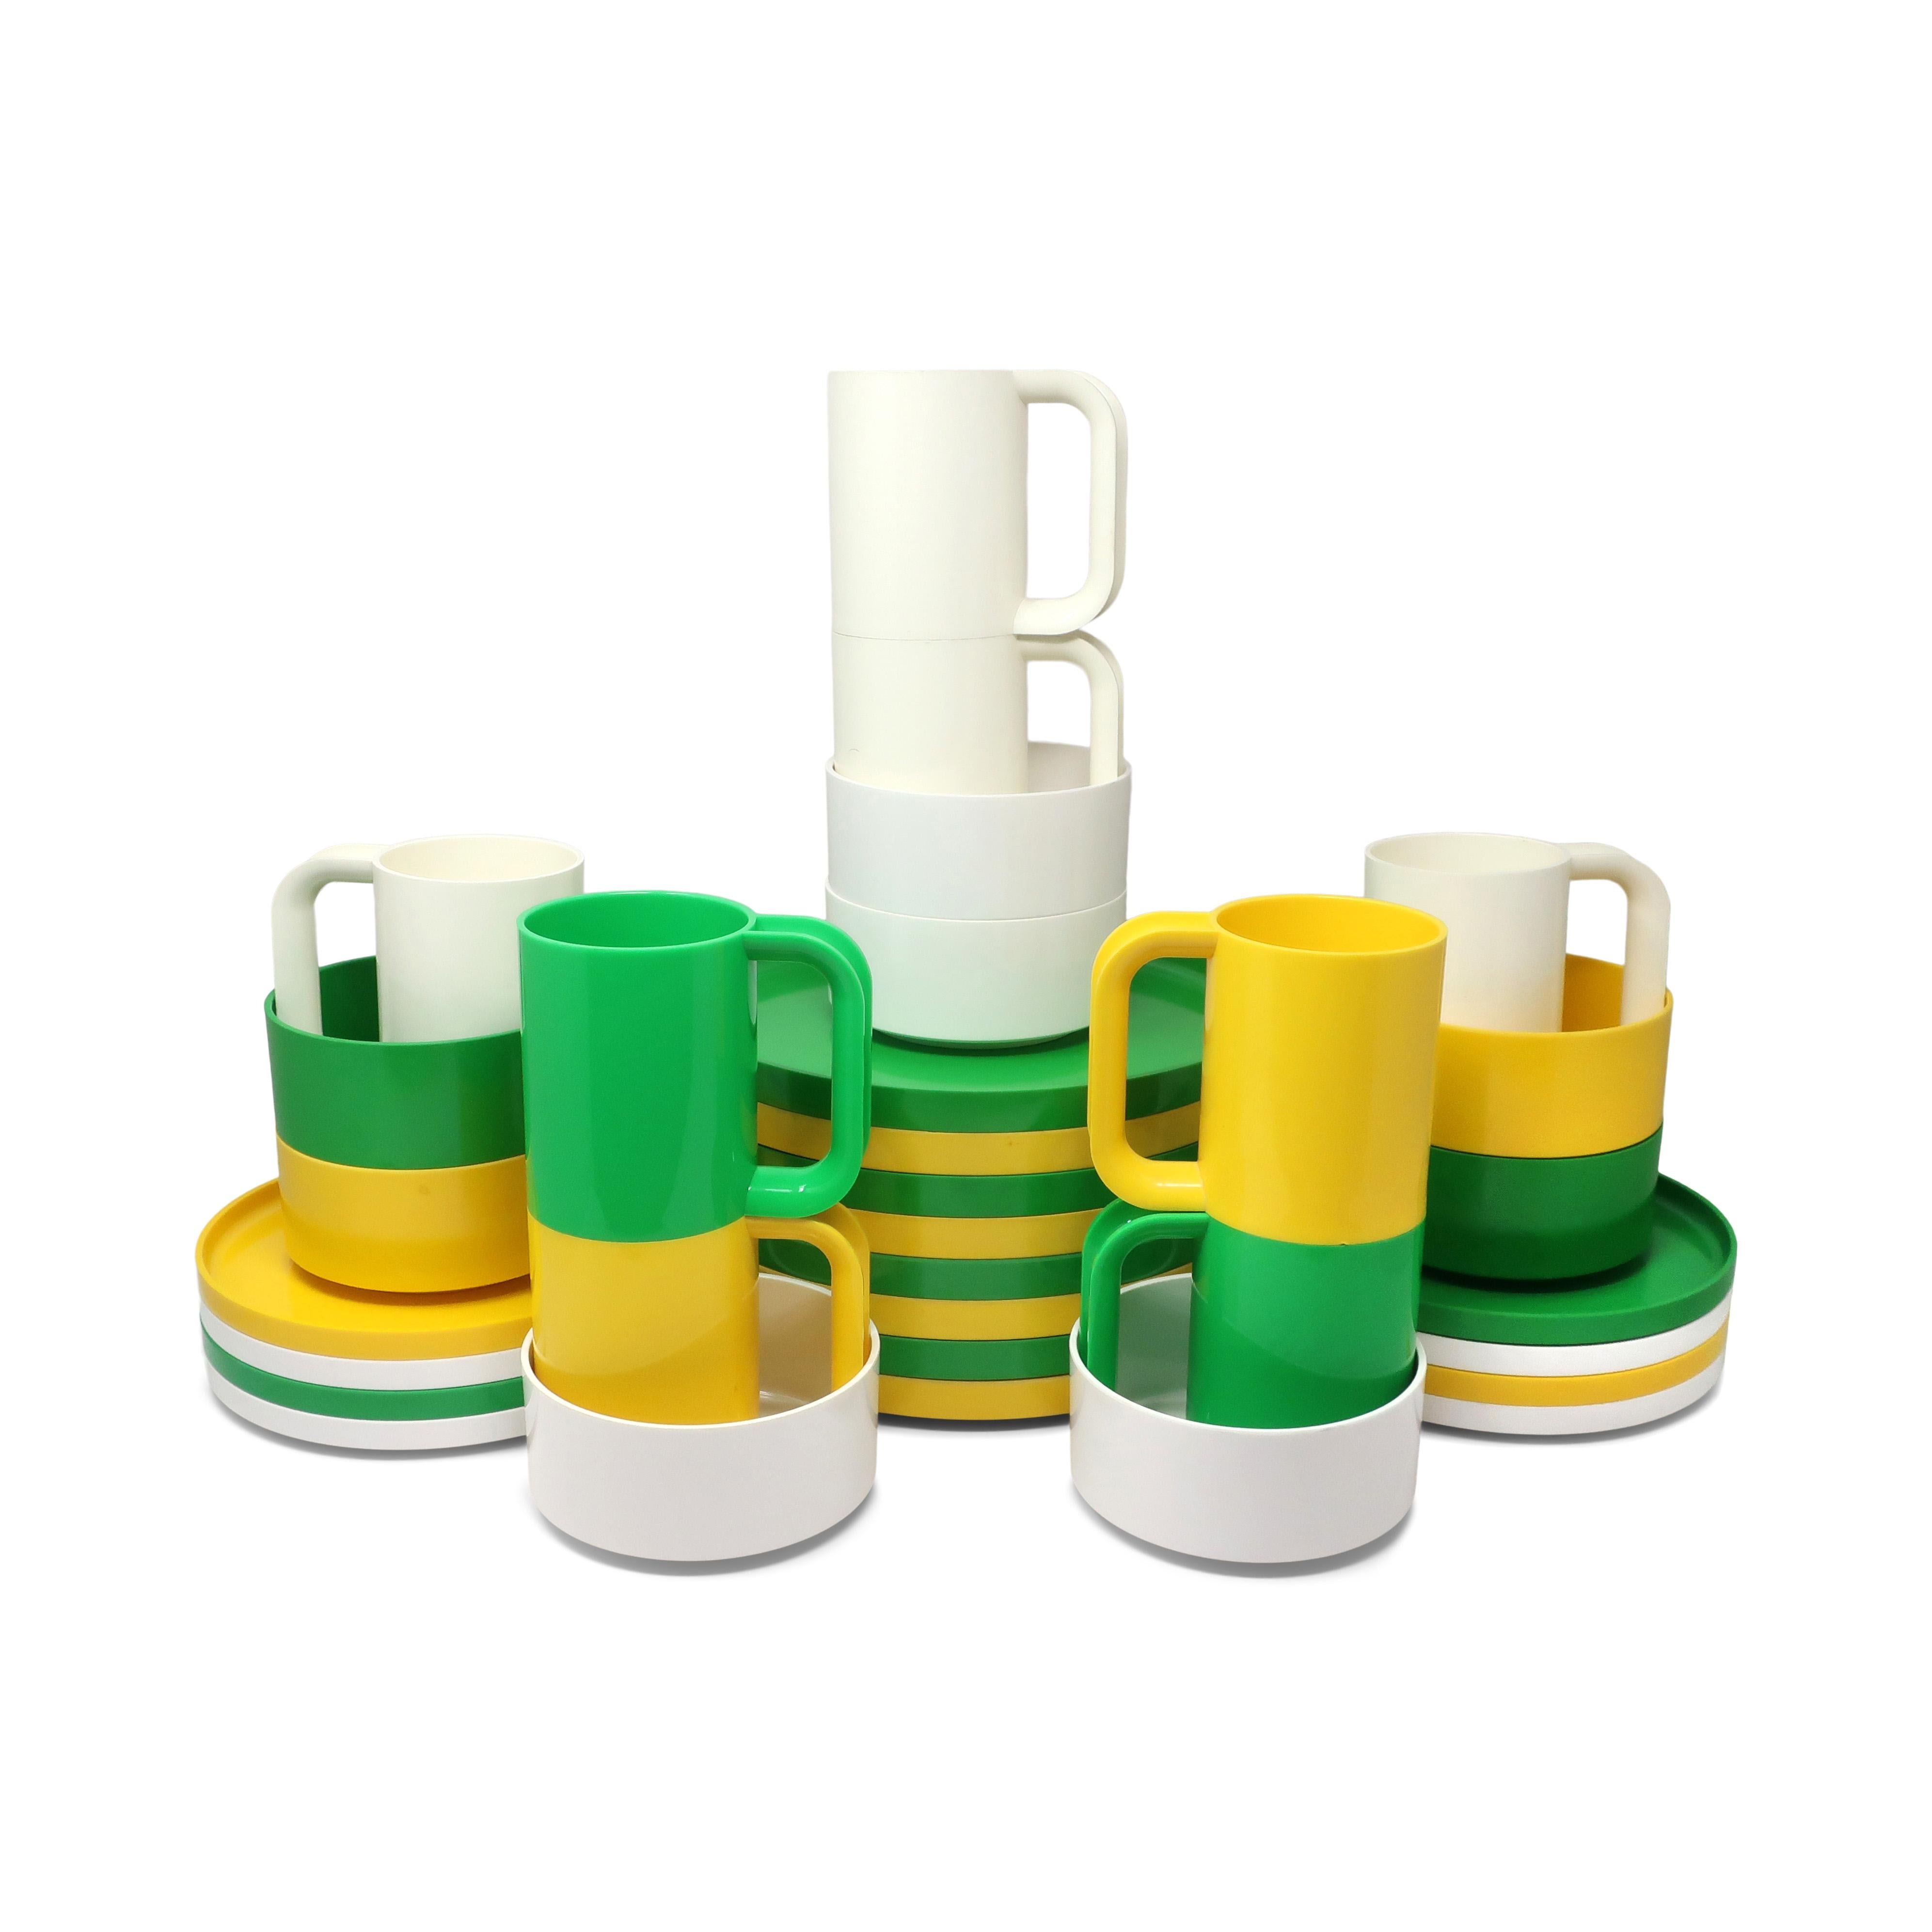 Green, Yellow and White Dinnerware by Vignelli for Heller, Set of 32 In Good Condition For Sale In Brooklyn, NY